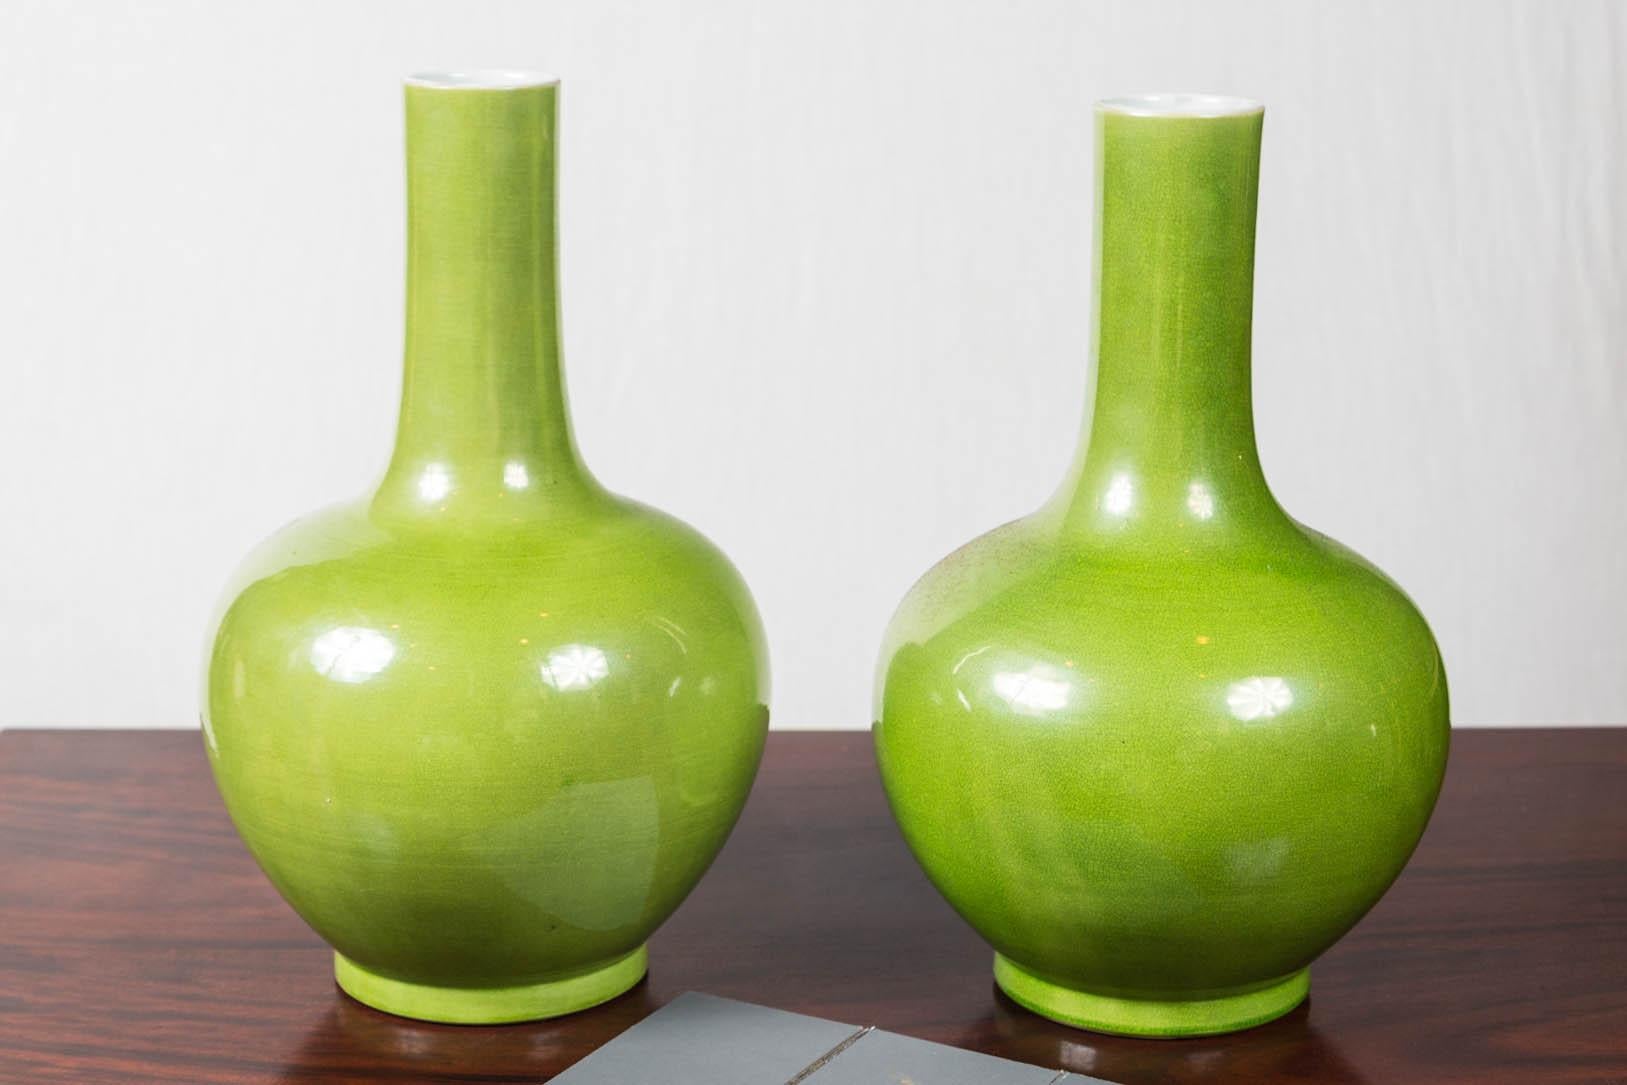 Chinese bottle shape vases in a brilliant yellow/green glaze.
unmarked.